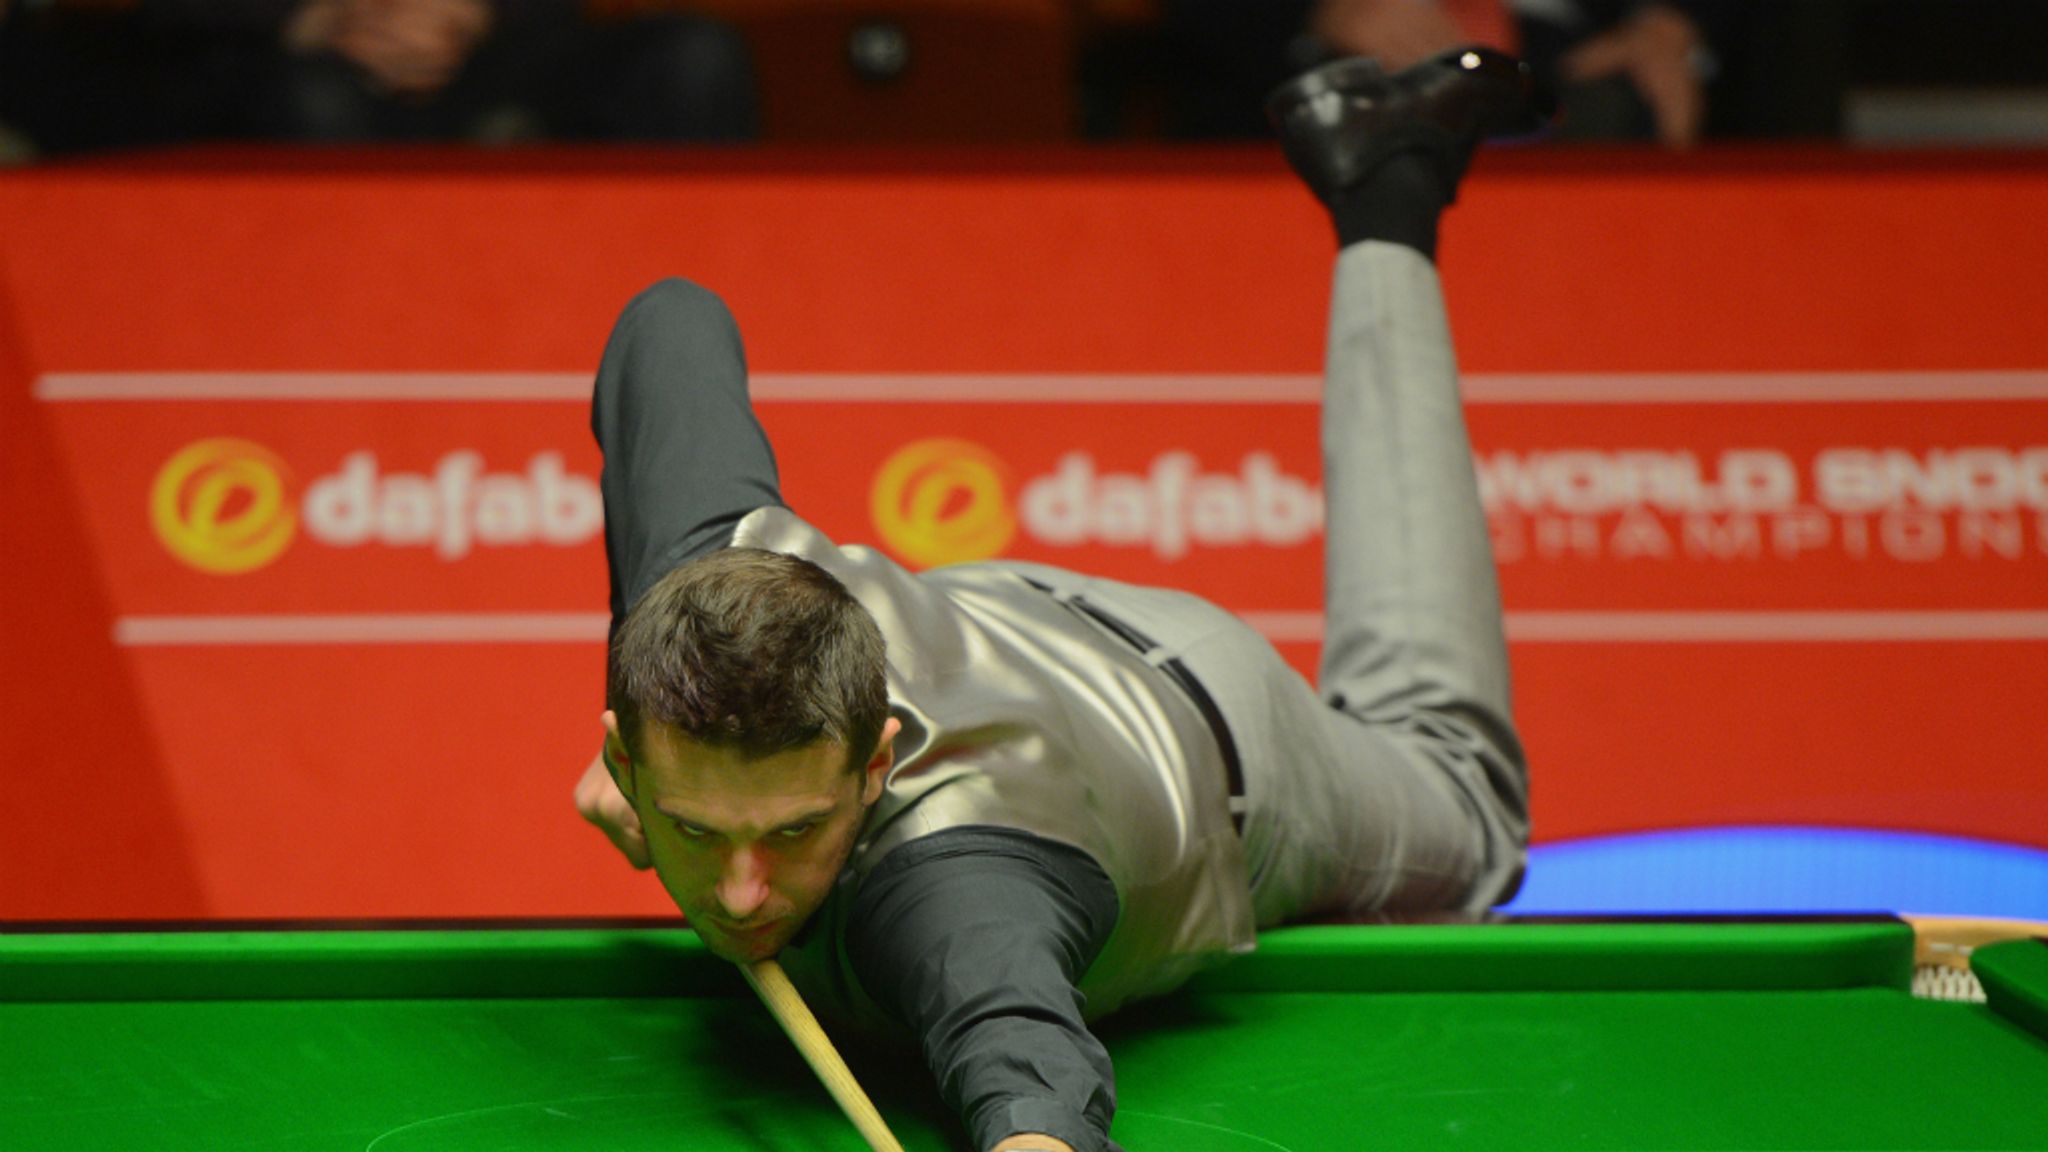 World Championship Mark Selby and Ronnie OSullivan reach semi-finals Snooker News Sky Sports